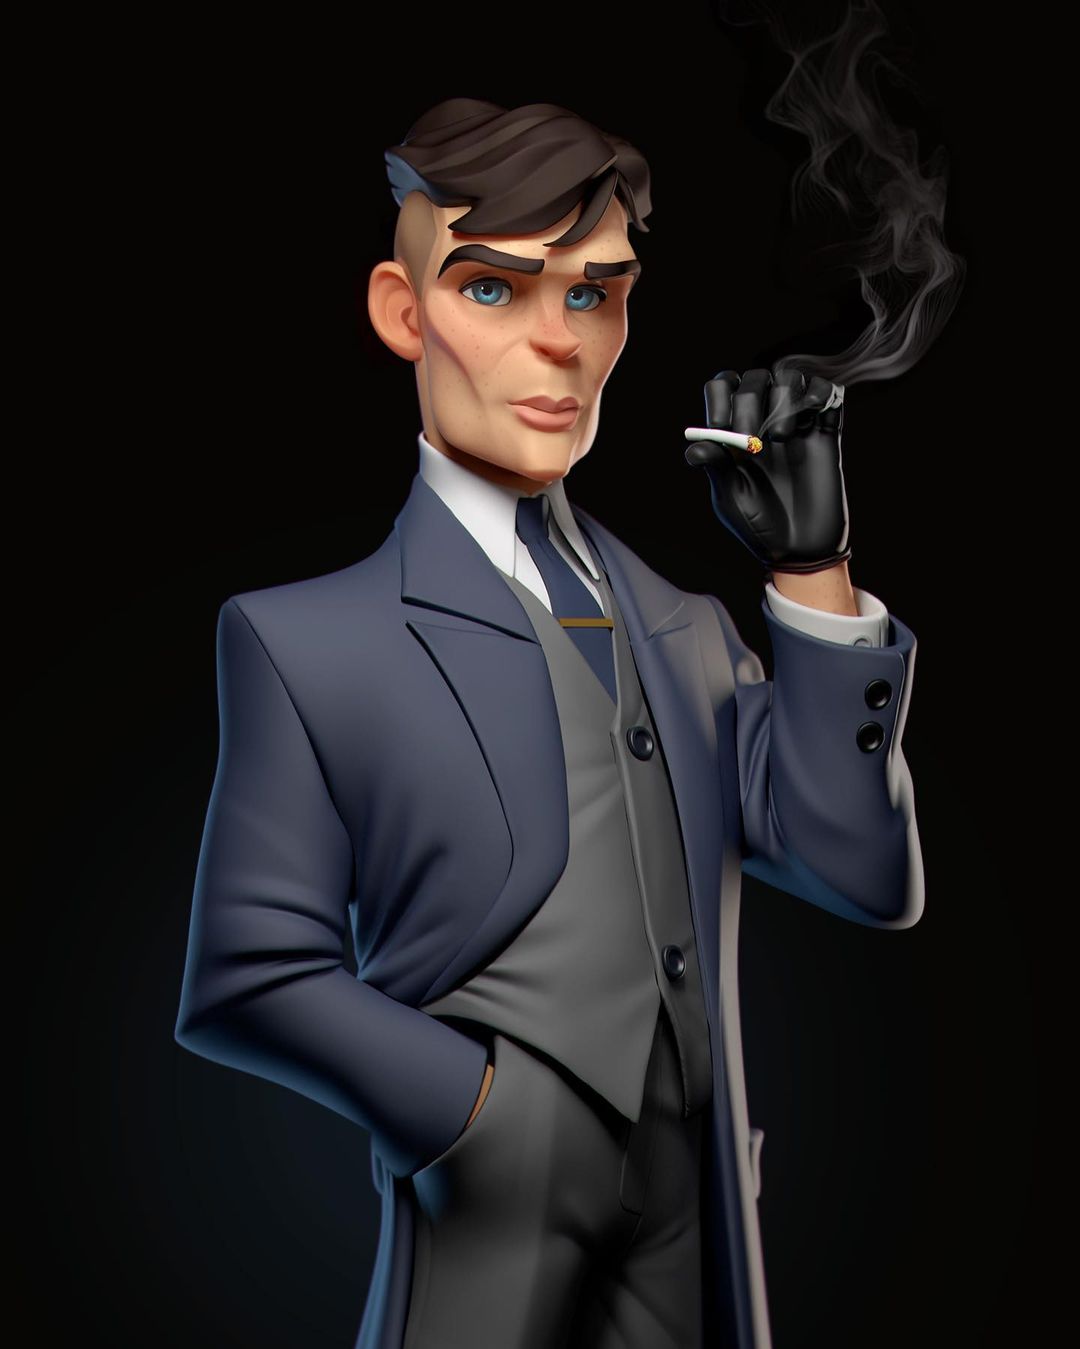 funny 3d model character tommy shelby by gabriel soares